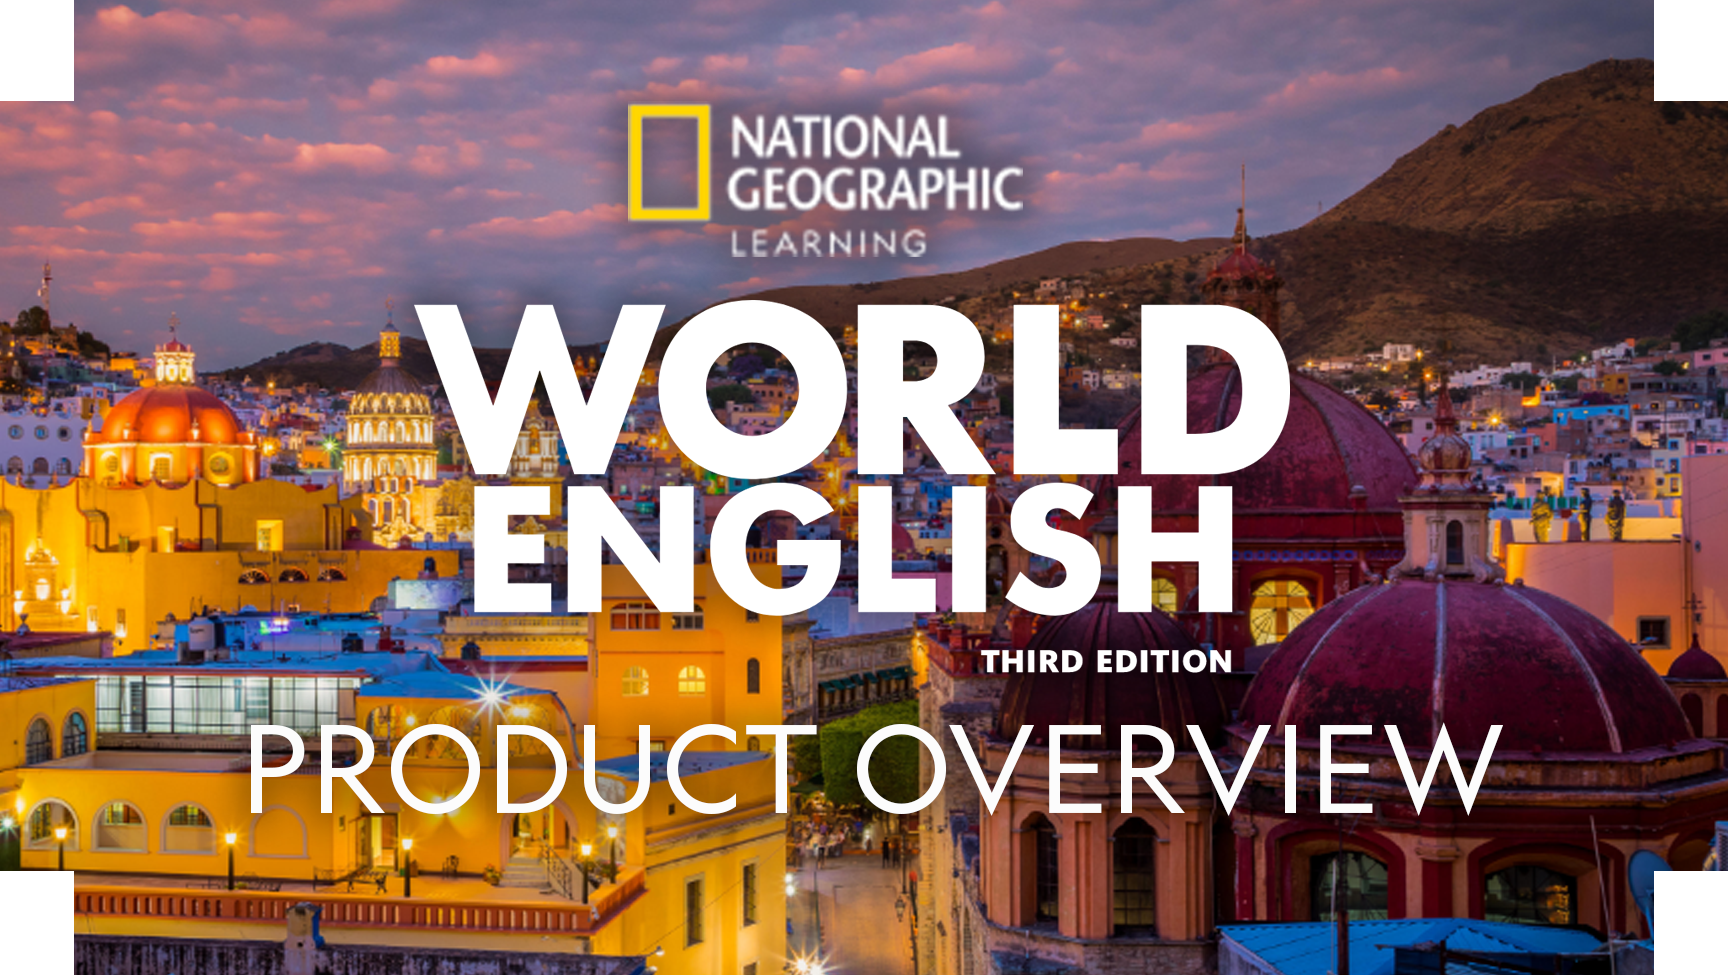 With World English, Third Edition learners experience the world through content and ideas from National Geographic and TED, providing the motivation to talk about what’s most important to them. 